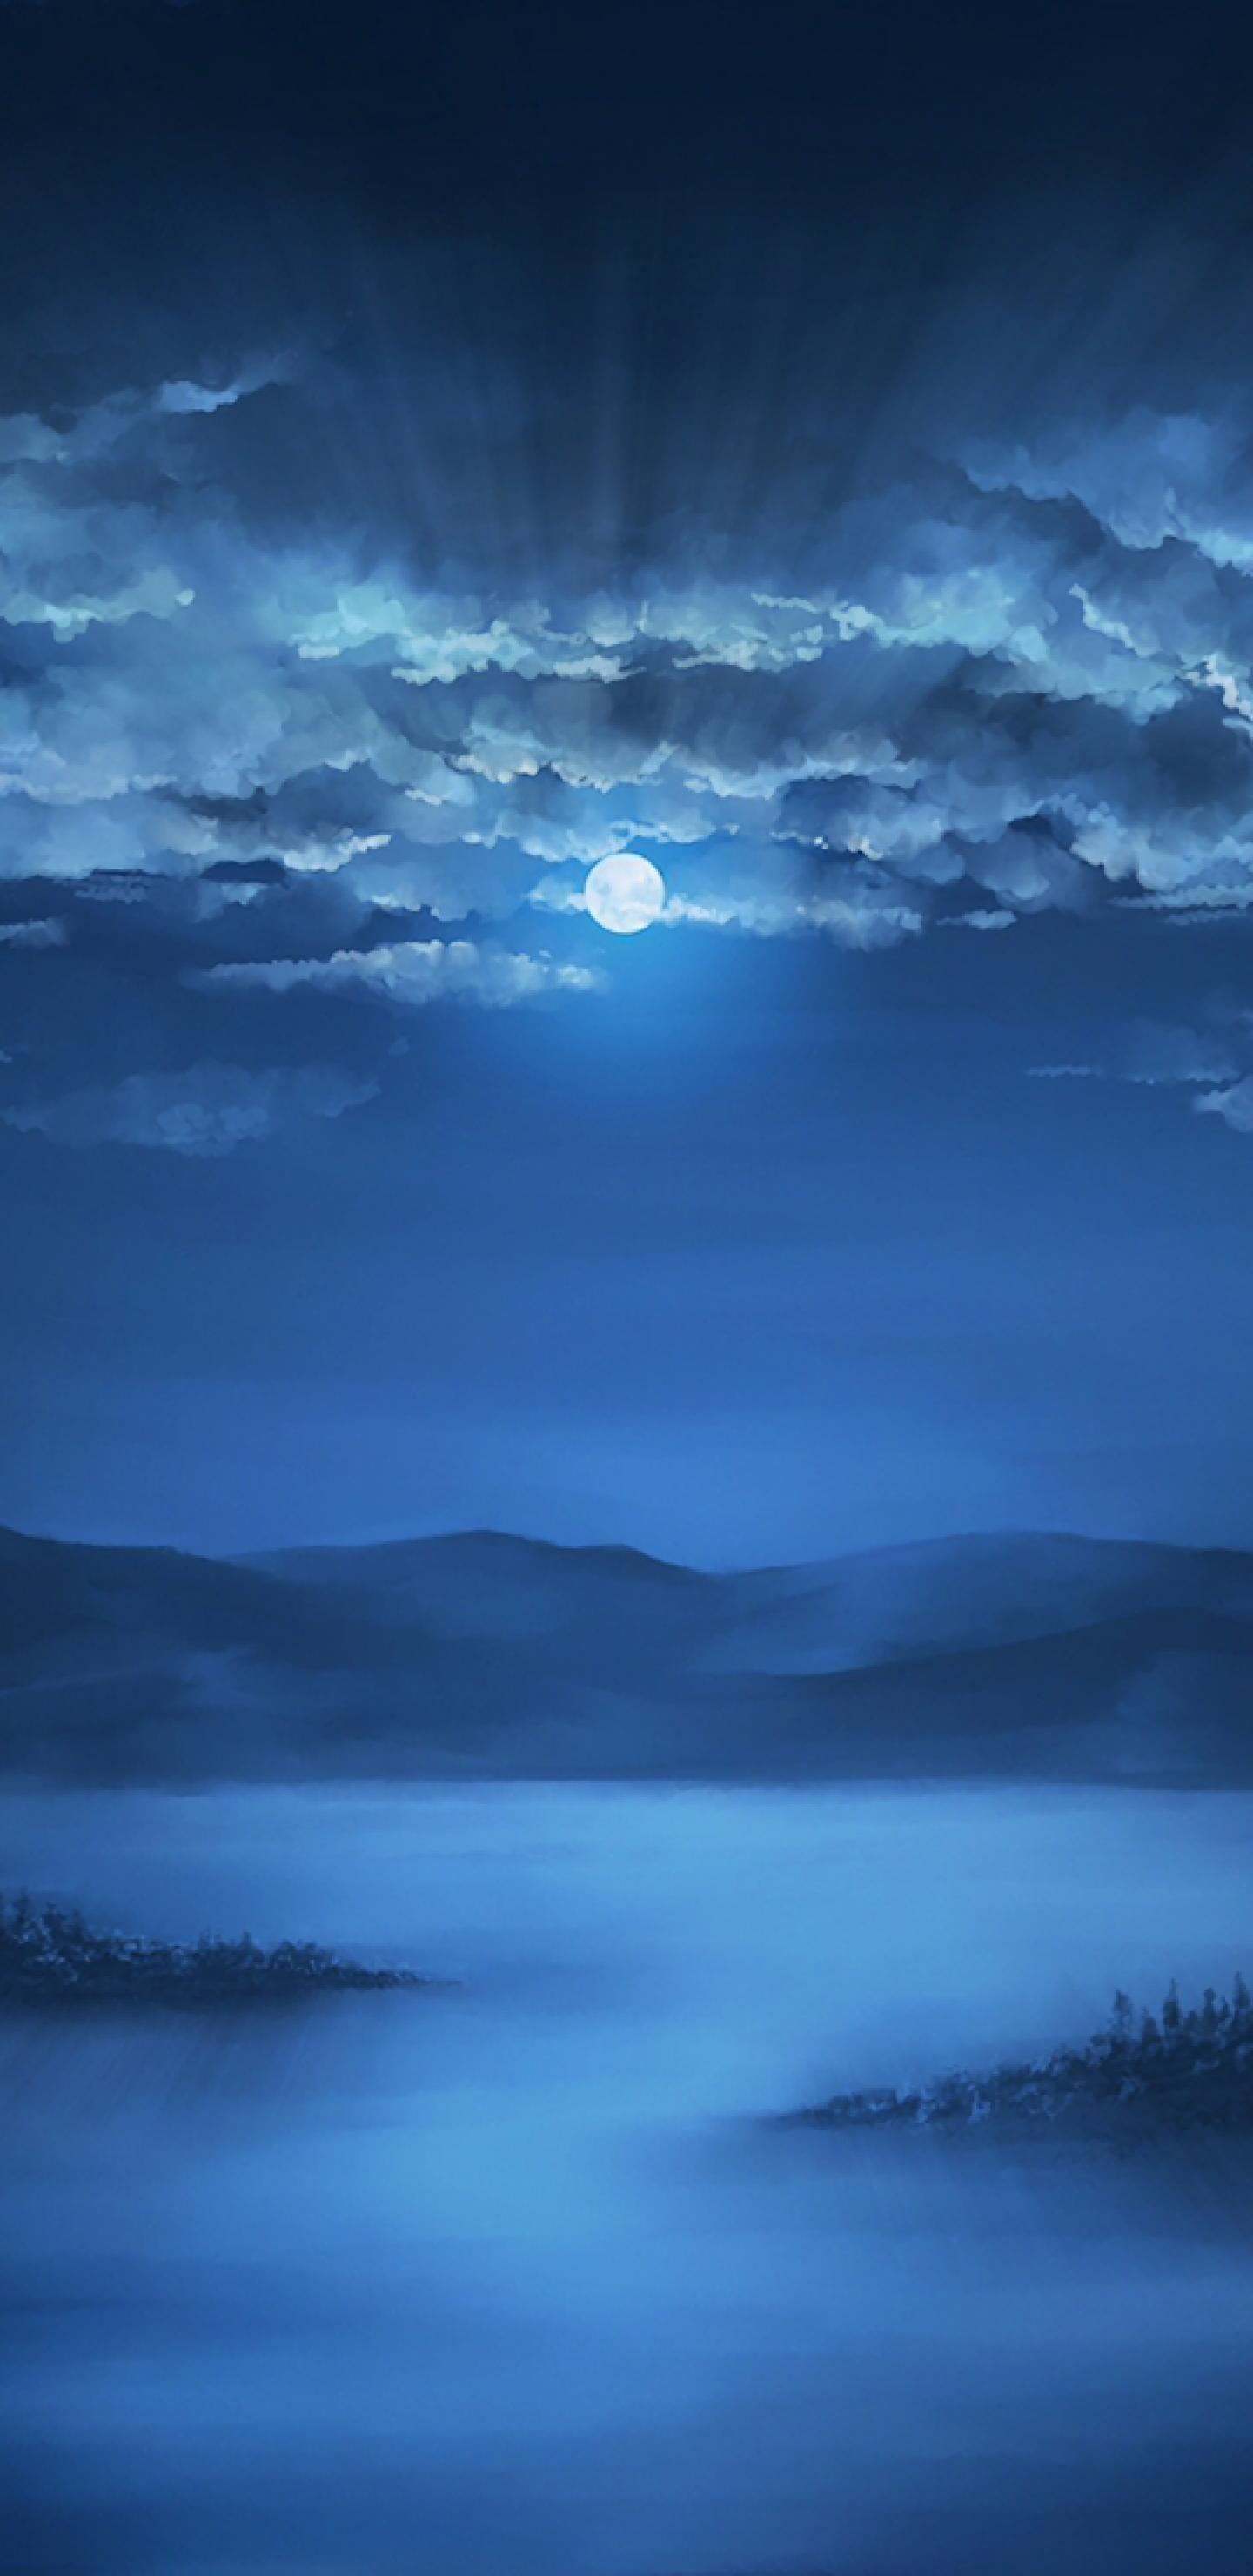 Download 1440x2960 Anime Landscape, Night, Moon, Clouds, Sky, Lake, Artwork Wallpaper for Samsung Galaxy S Note S S8+, Google Pixel 3 XL